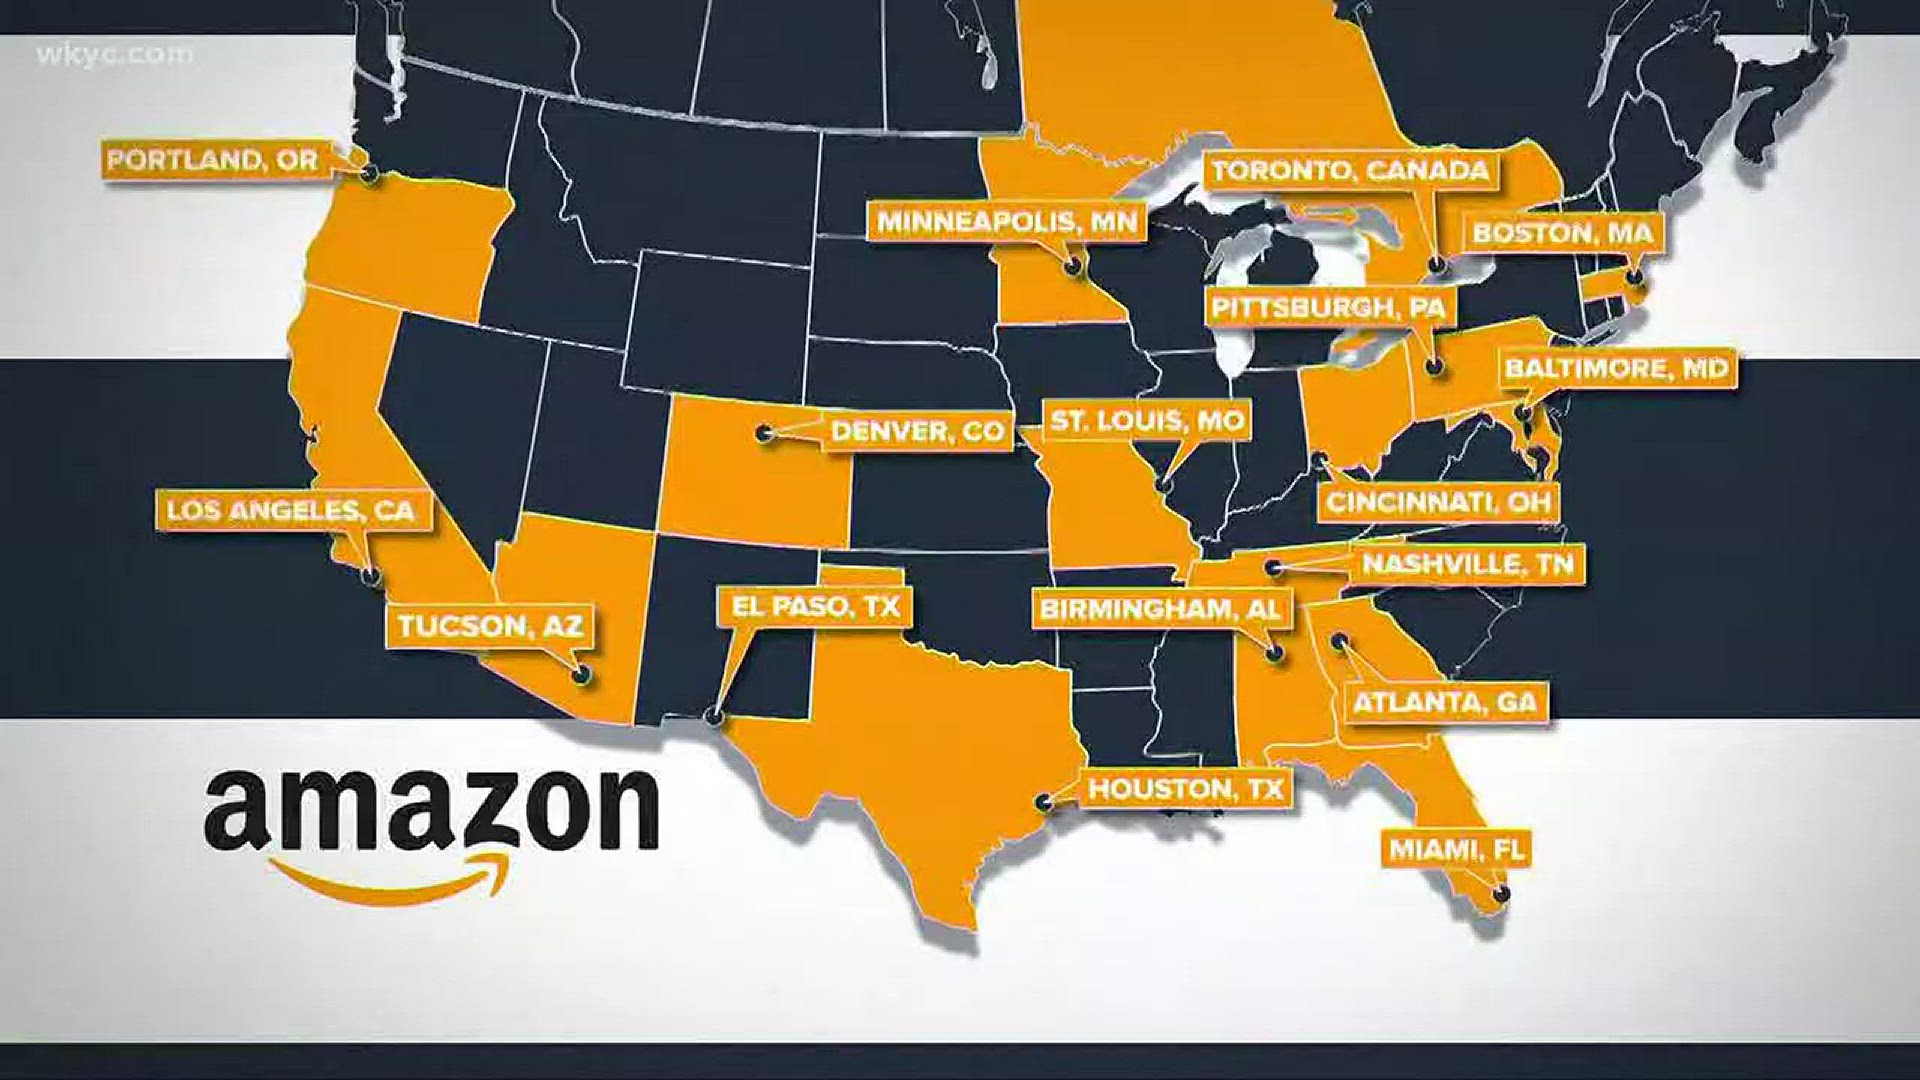 Jan. 18, 2018: Cleveland campaigned to bring Amazon's second headquarters to Northeast Ohio, but the attempts were unsuccessful. Amazon has narrowed their list of locations that could be home to their second headquarters -- and Cleveland is not one of the